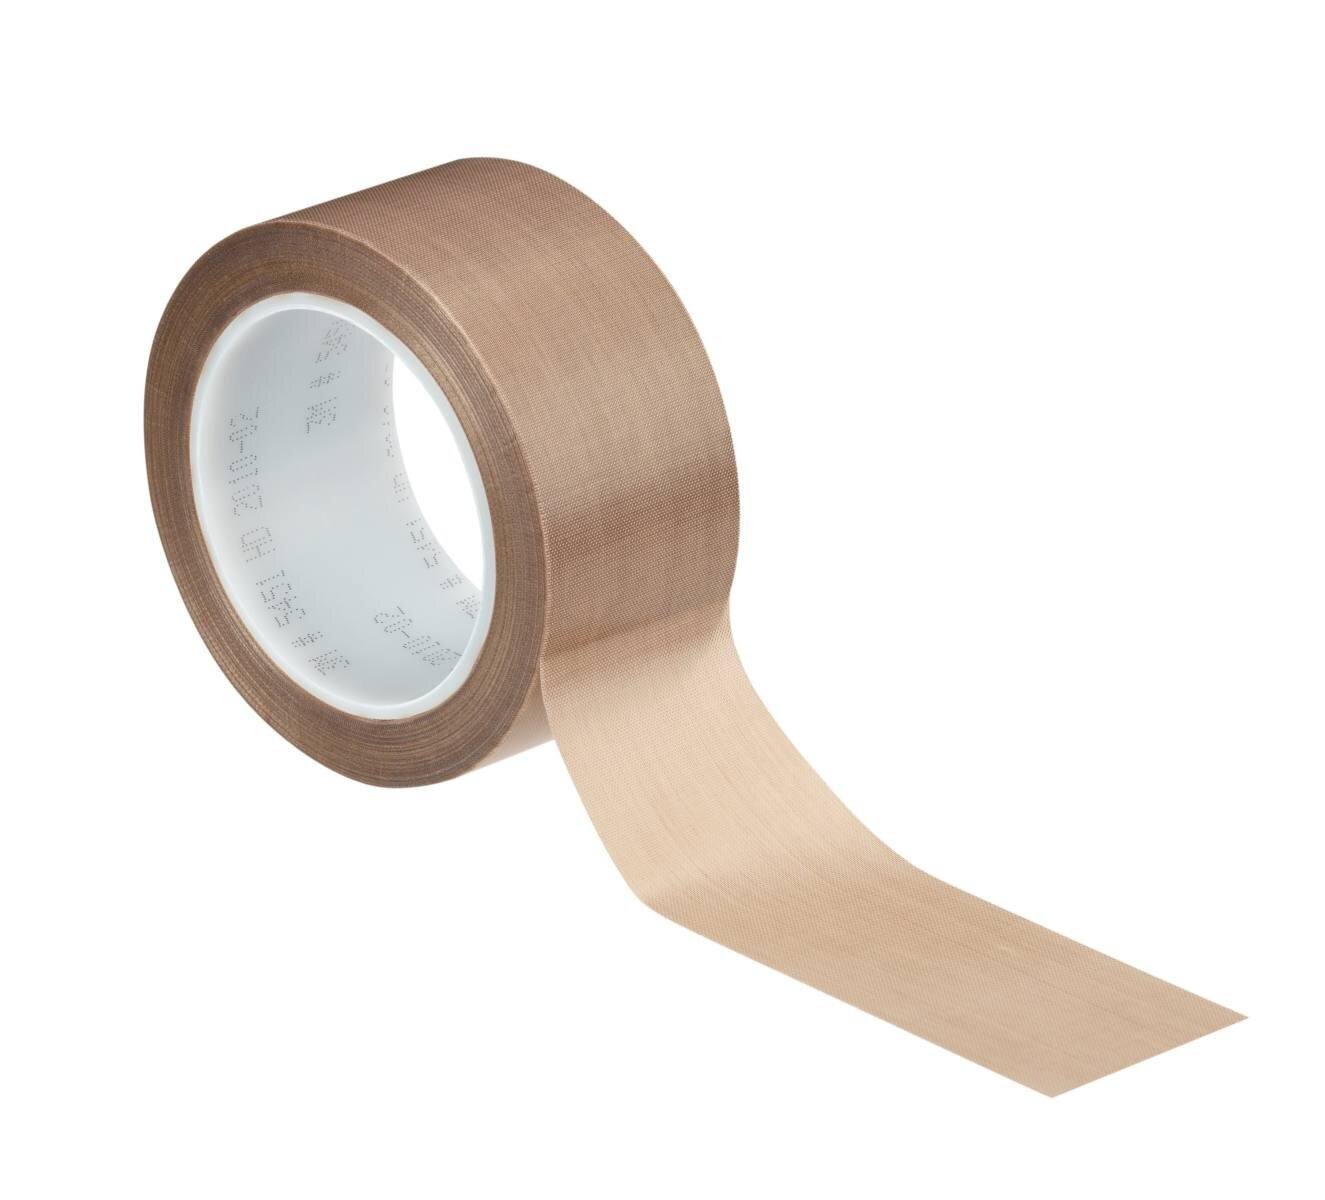 3M 5451 PTFE glass adhesive tape 50mmx33m, 0.14mm, silicone